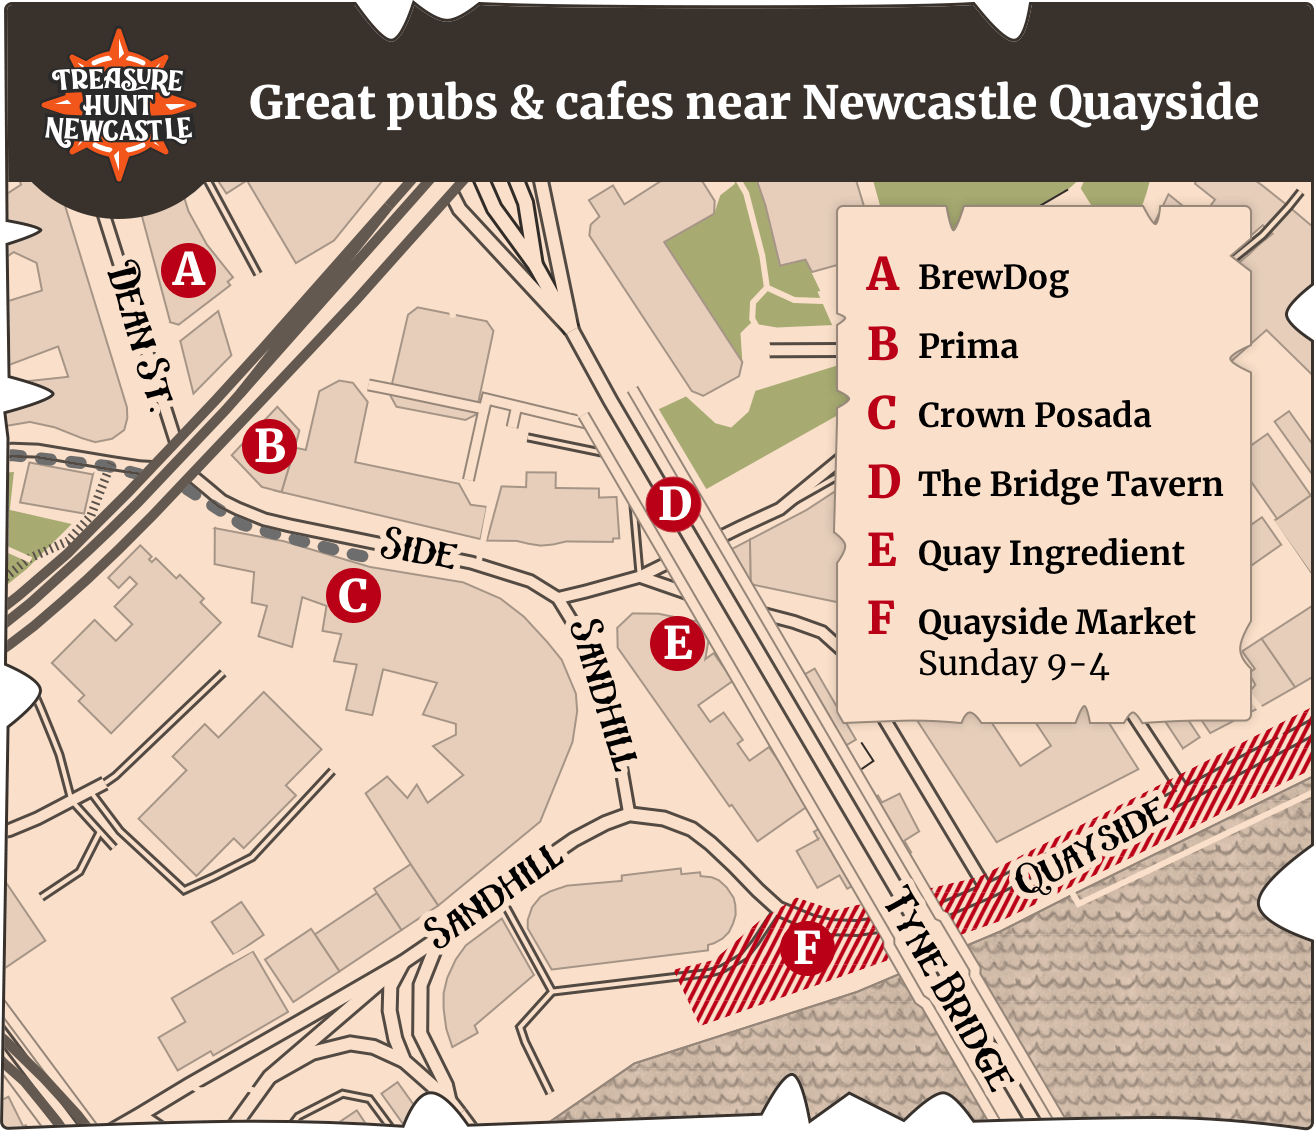 A map showing some great pubs and cafes new Newcastle Quayside